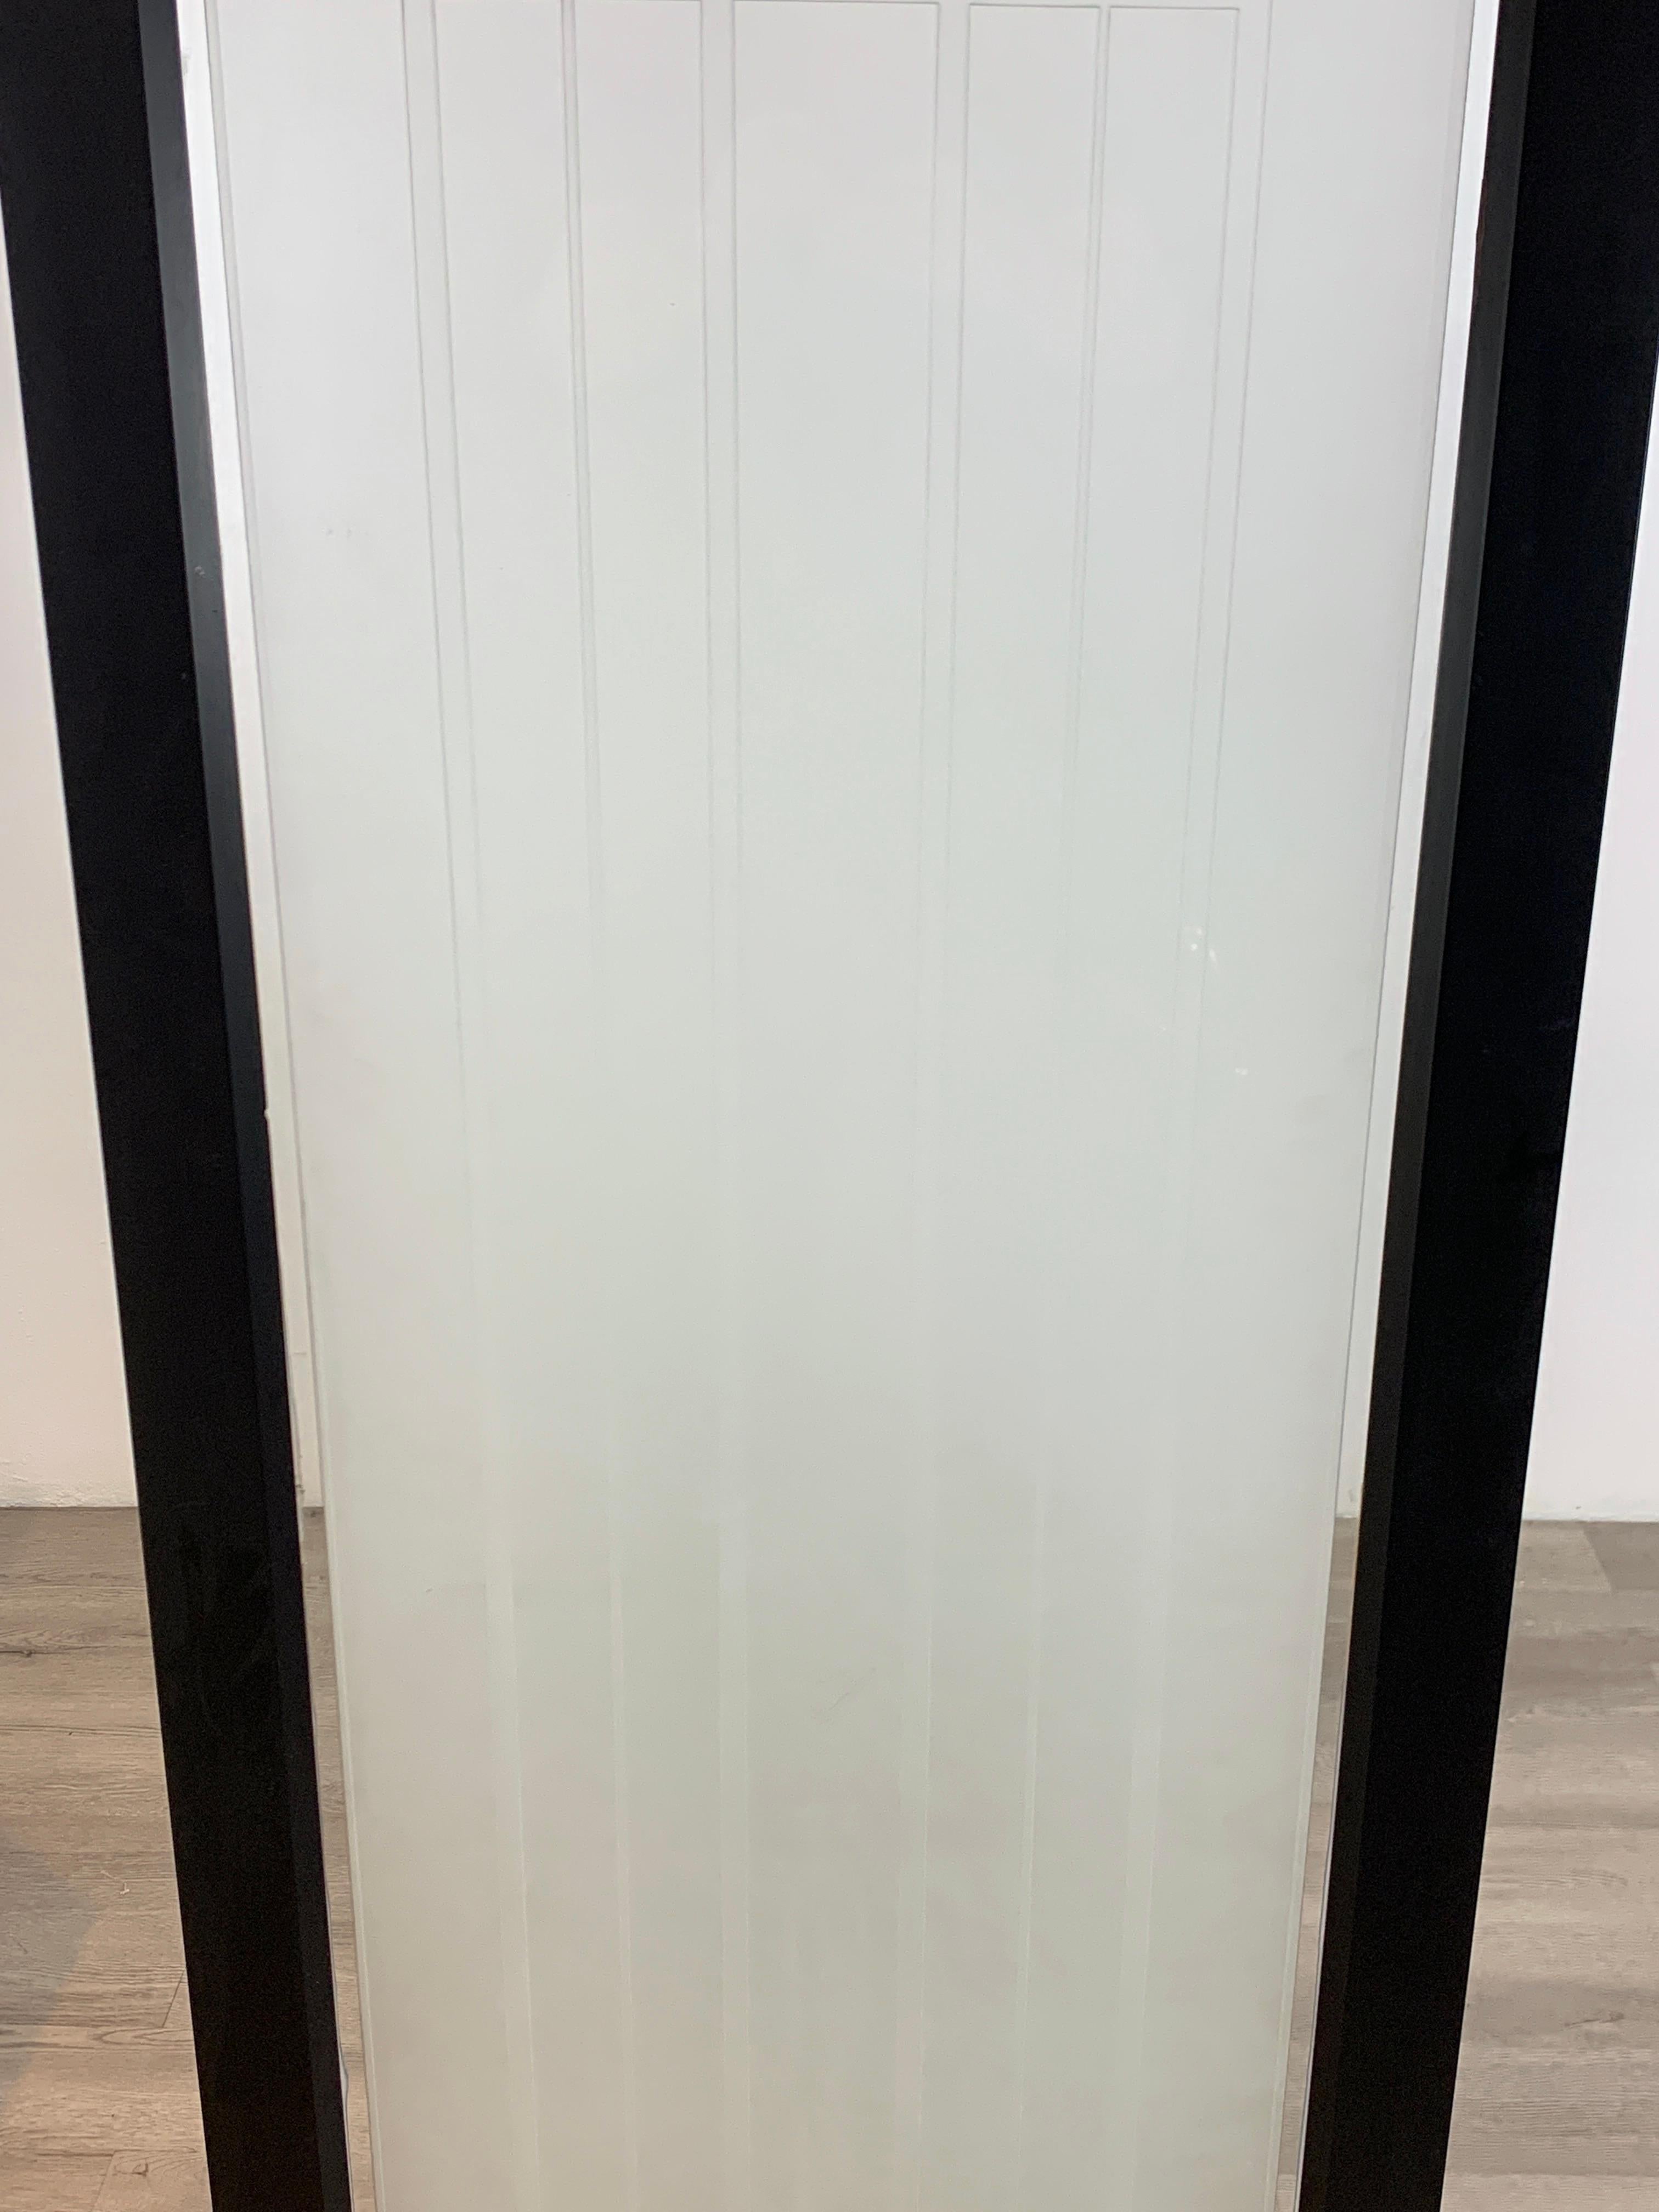 Blackened Tall Prairie Style Frosted Glass Window, Frank Lloyd Wright Style, 4 Available For Sale